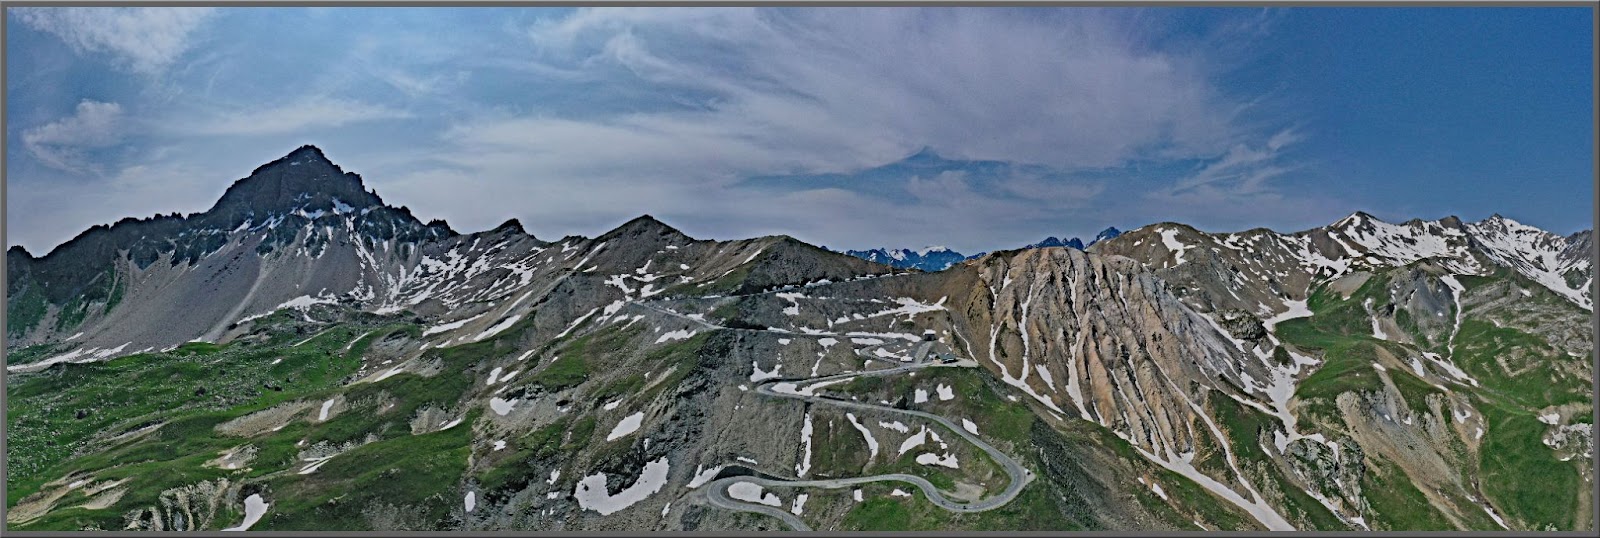 Cycling Col du Galibier from Valloire: panoramic view of roadway snaking up snow-dotted alps